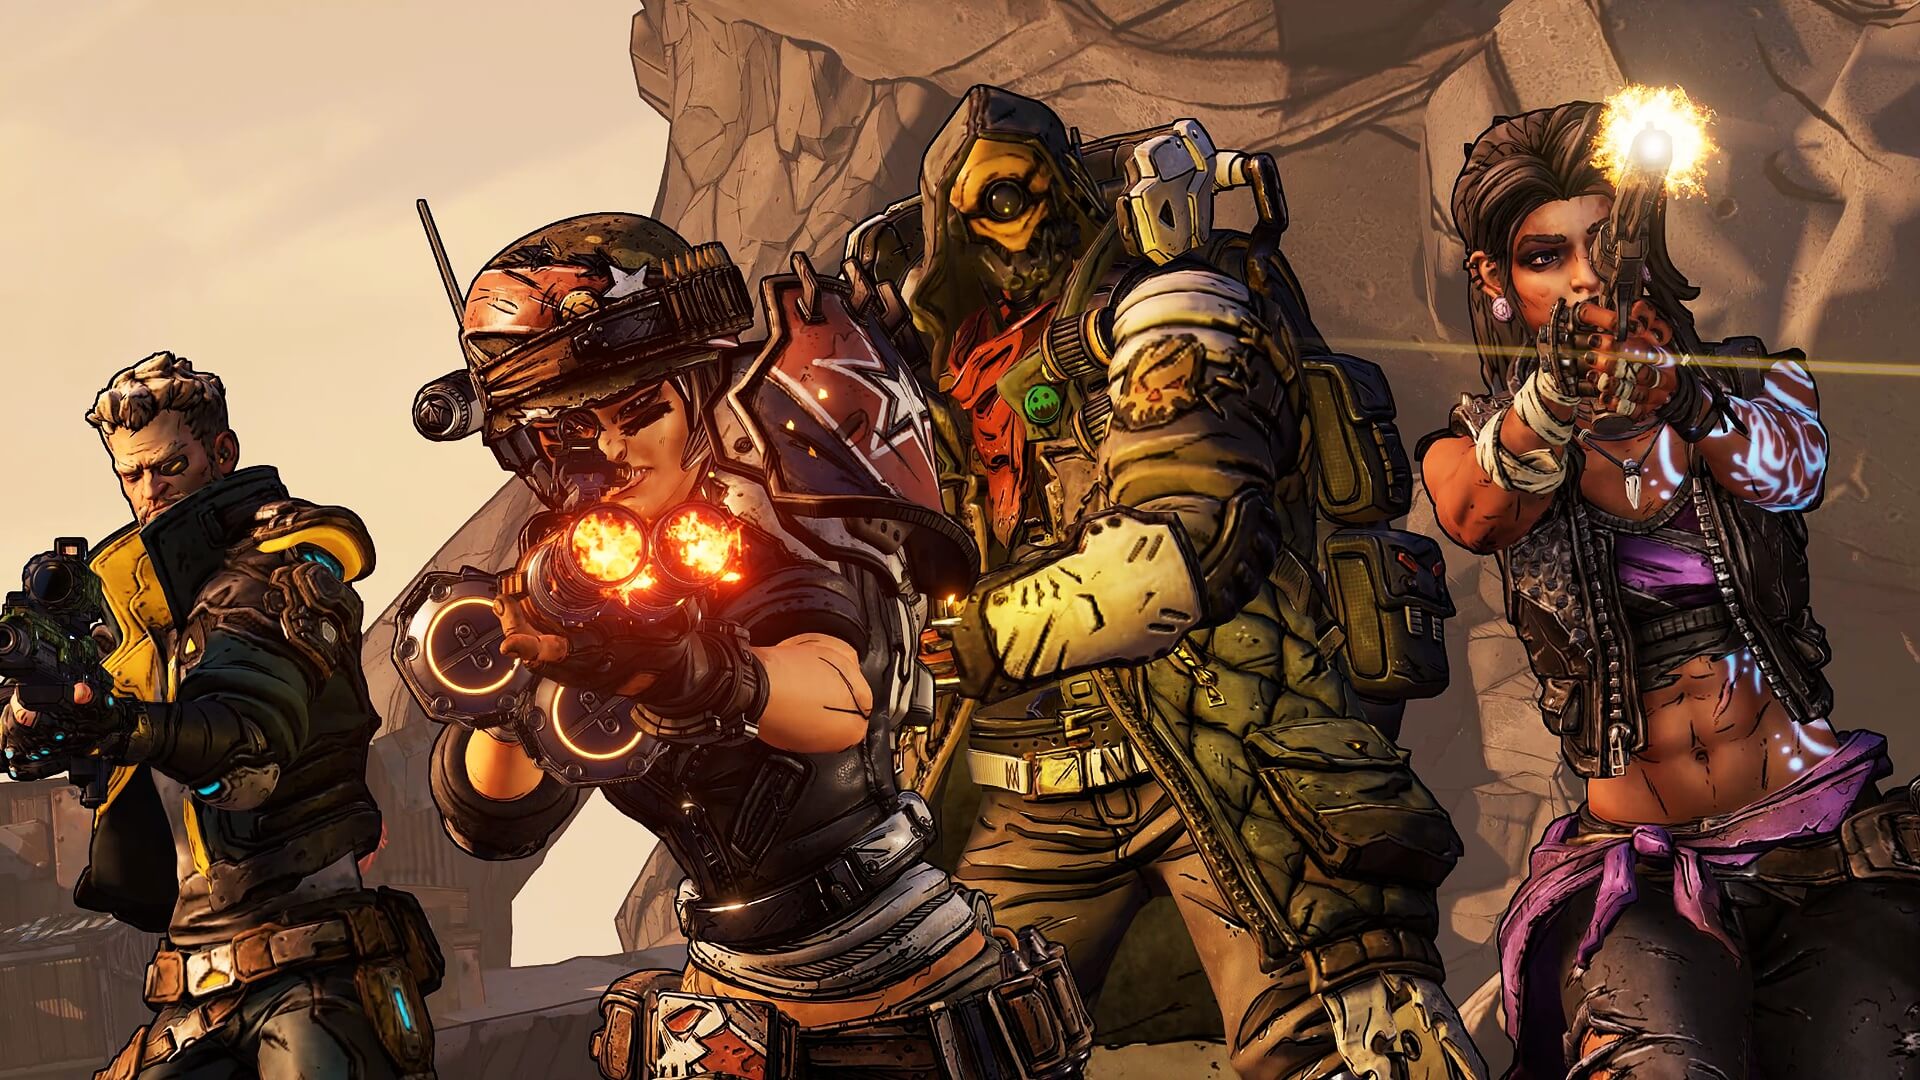 New Borderlands 3 Trailer Is a Cavalcade of Guns and Explosions